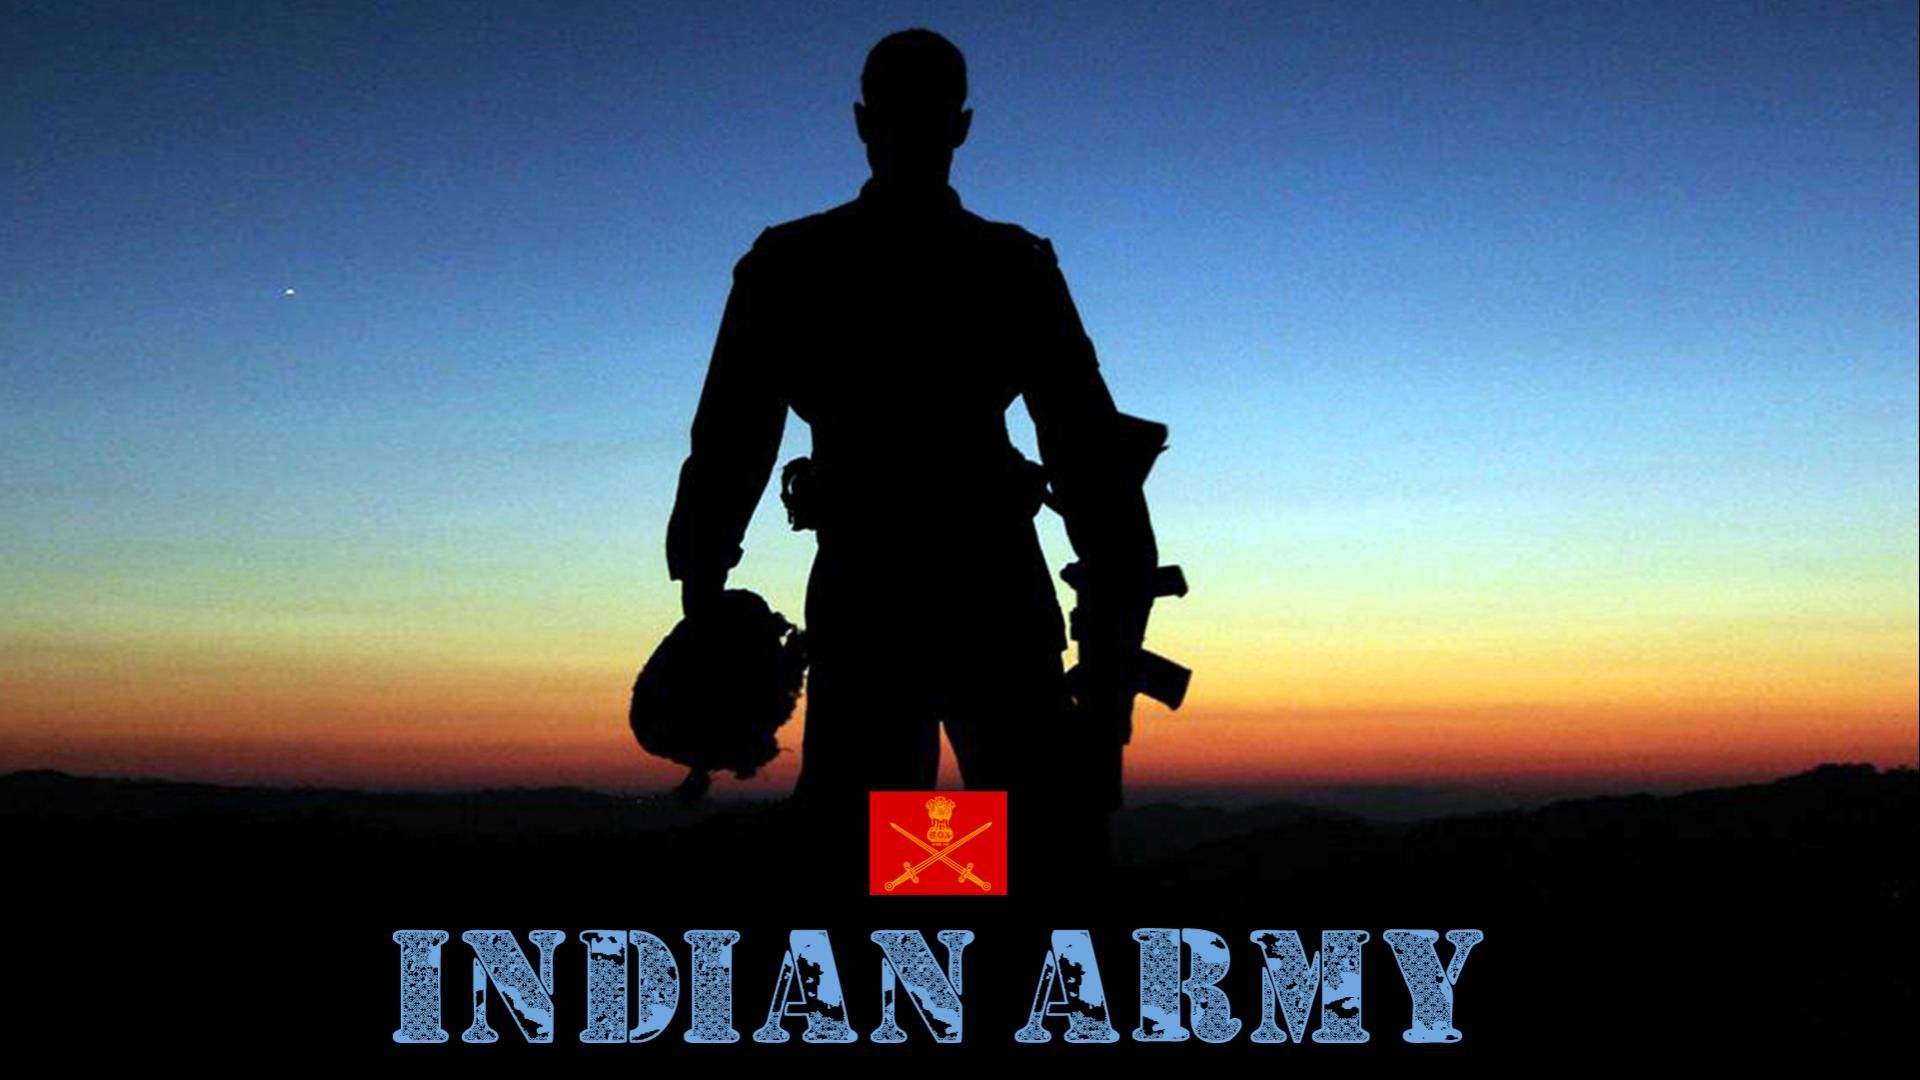 Indian army puter hd wallpapers